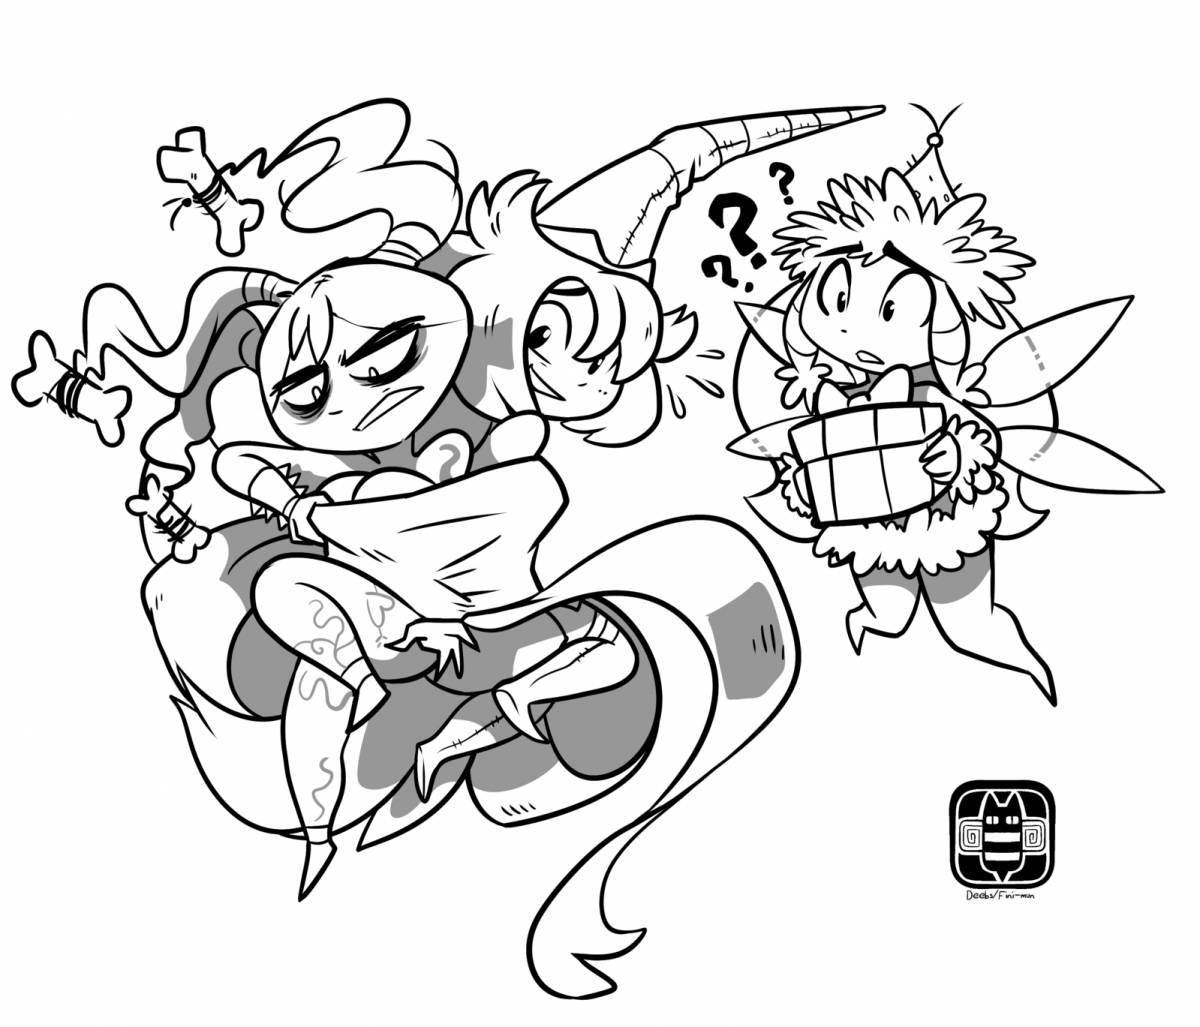 Rayman legends colorful coloring page